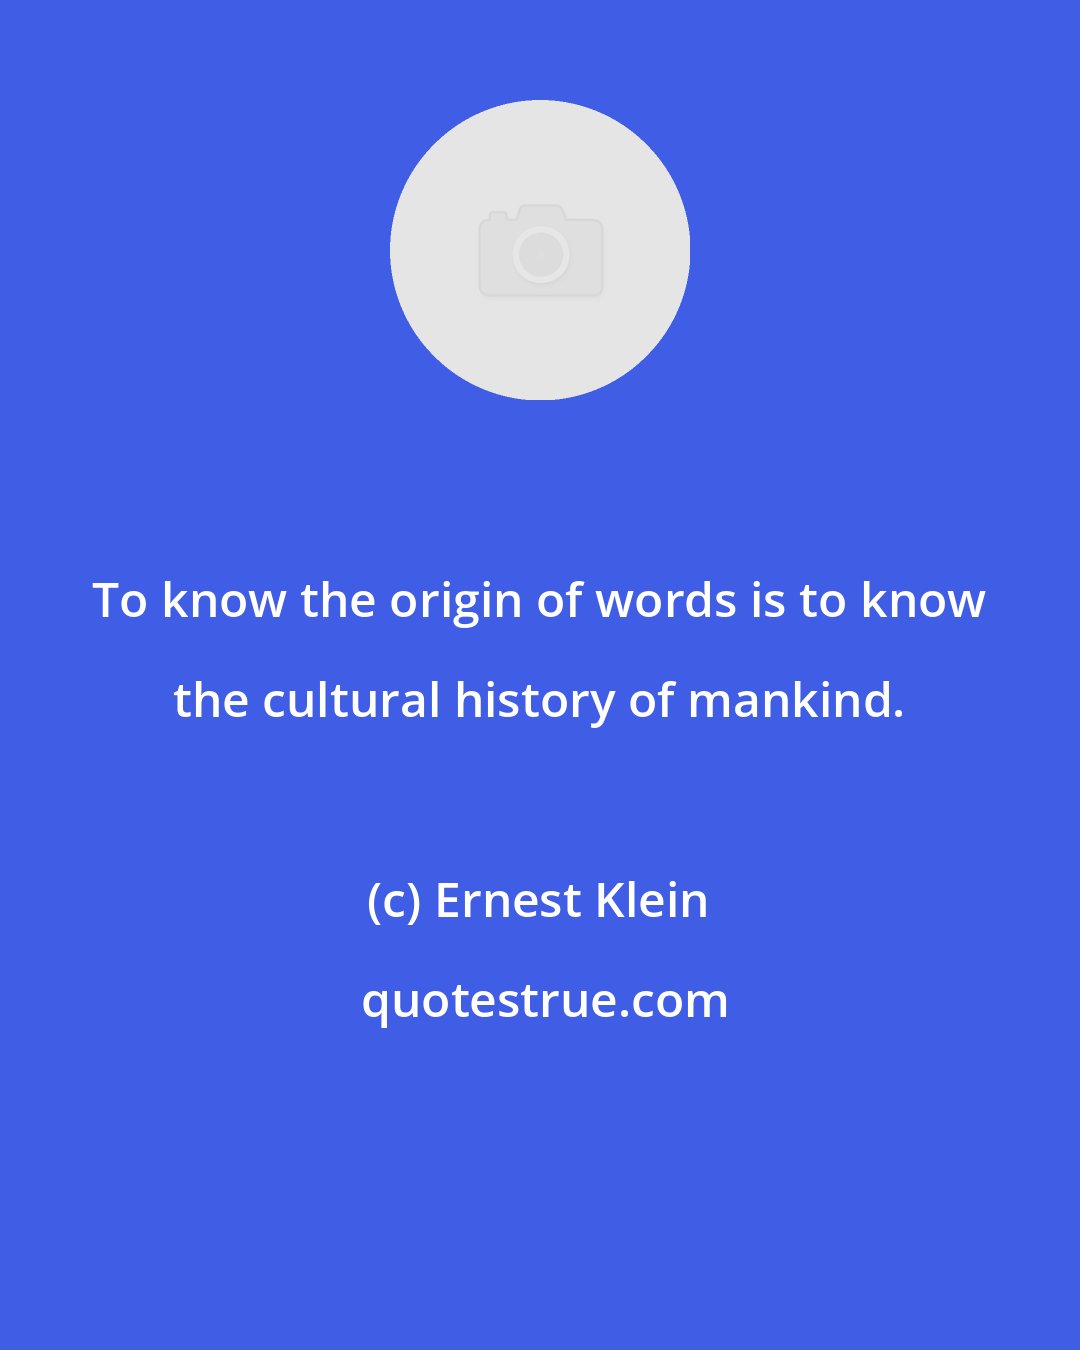 Ernest Klein: To know the origin of words is to know the cultural history of mankind.